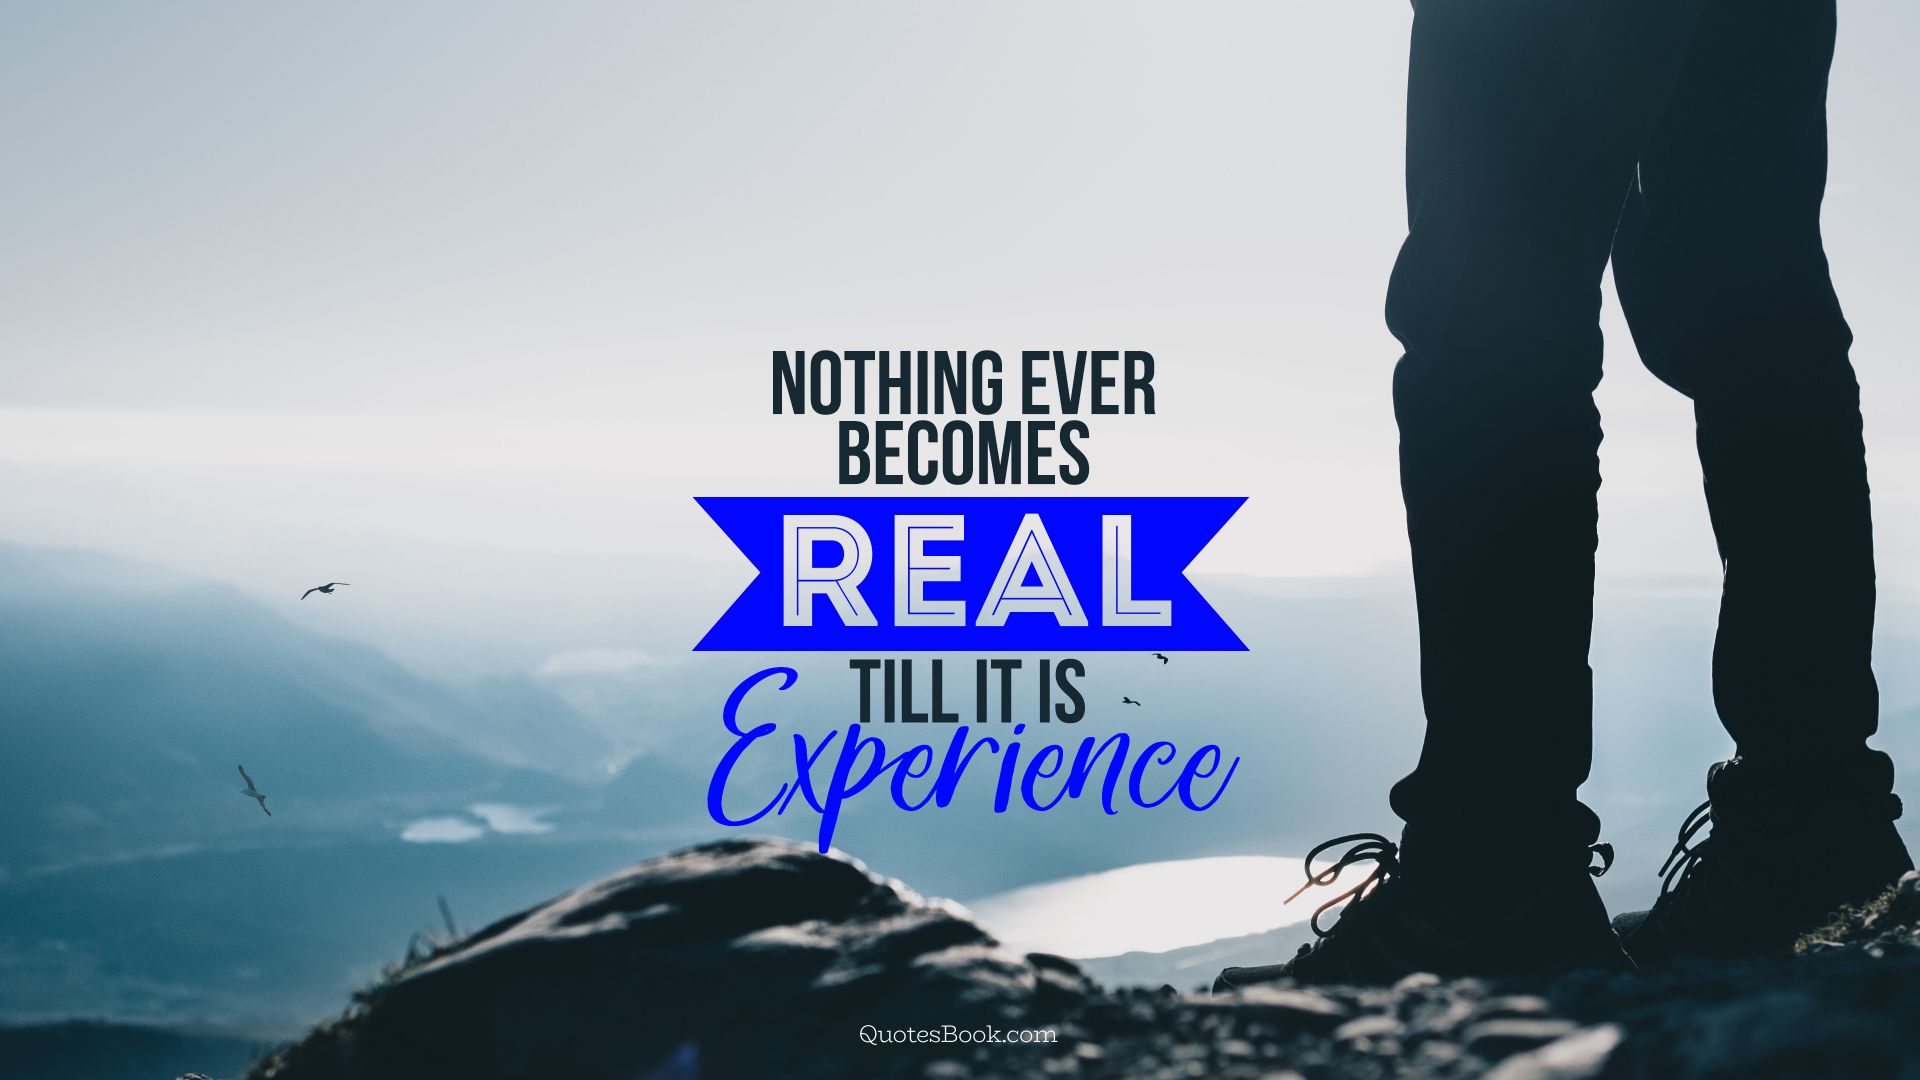 Nothing ever becomes real till it is experienced